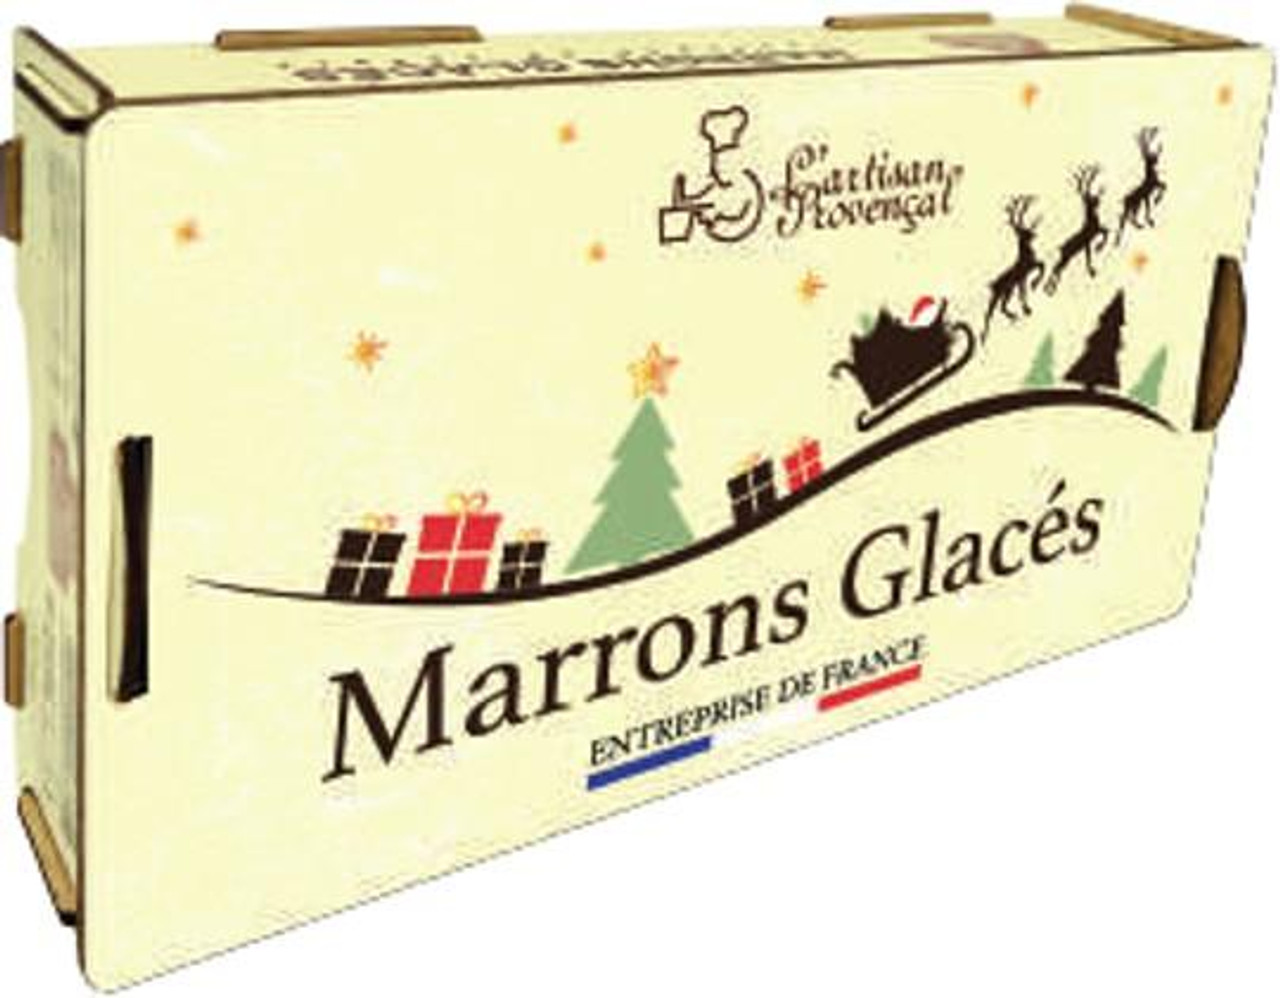 Award Winning Marron Glace. The best you can buy !!